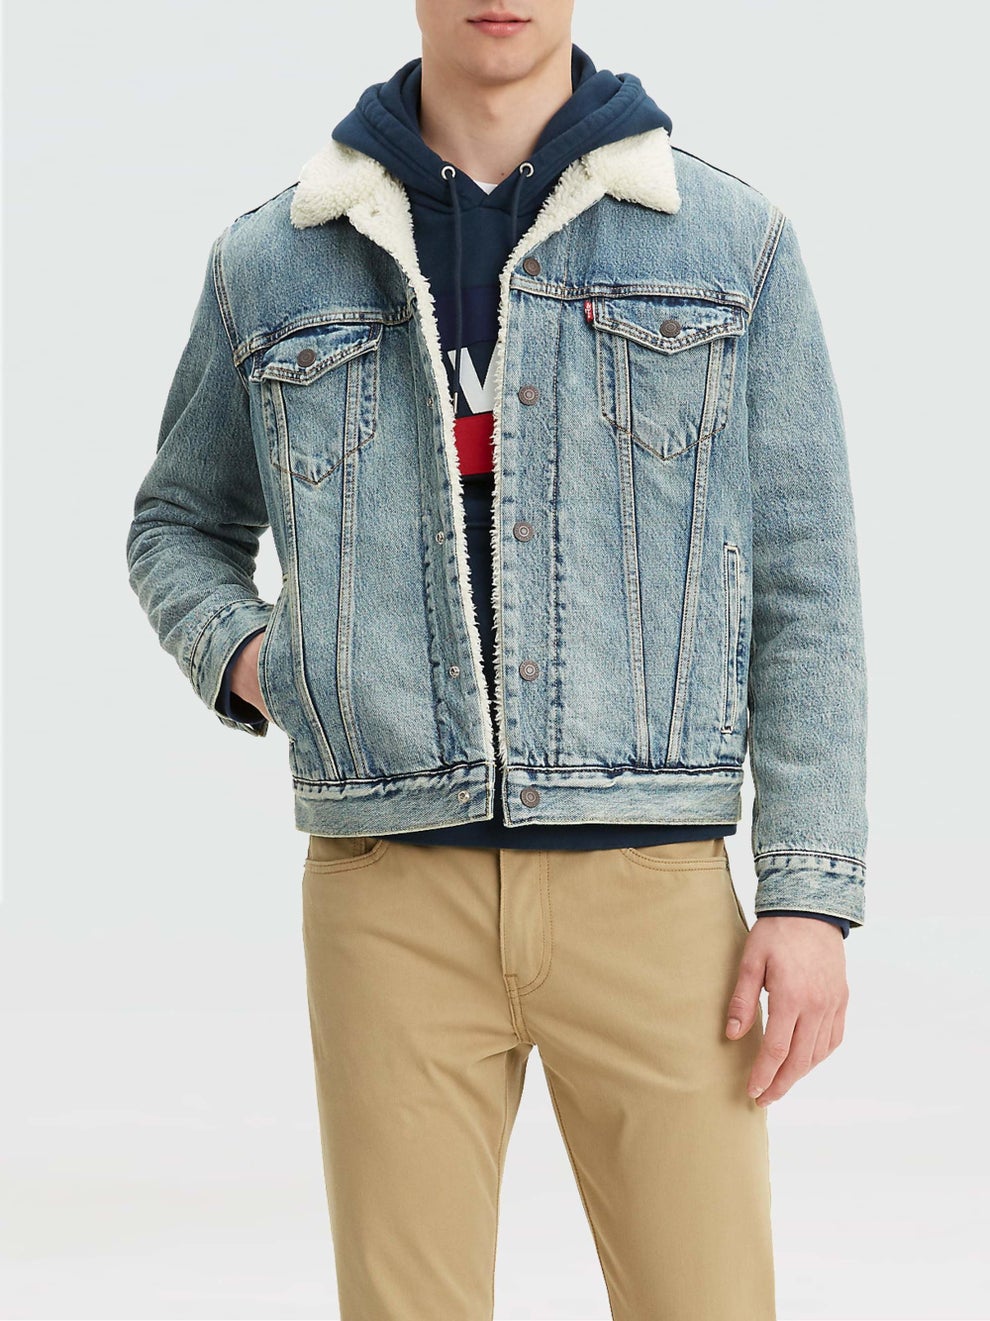 17 Of The Best Men's Jackets You Can Get At Walmart